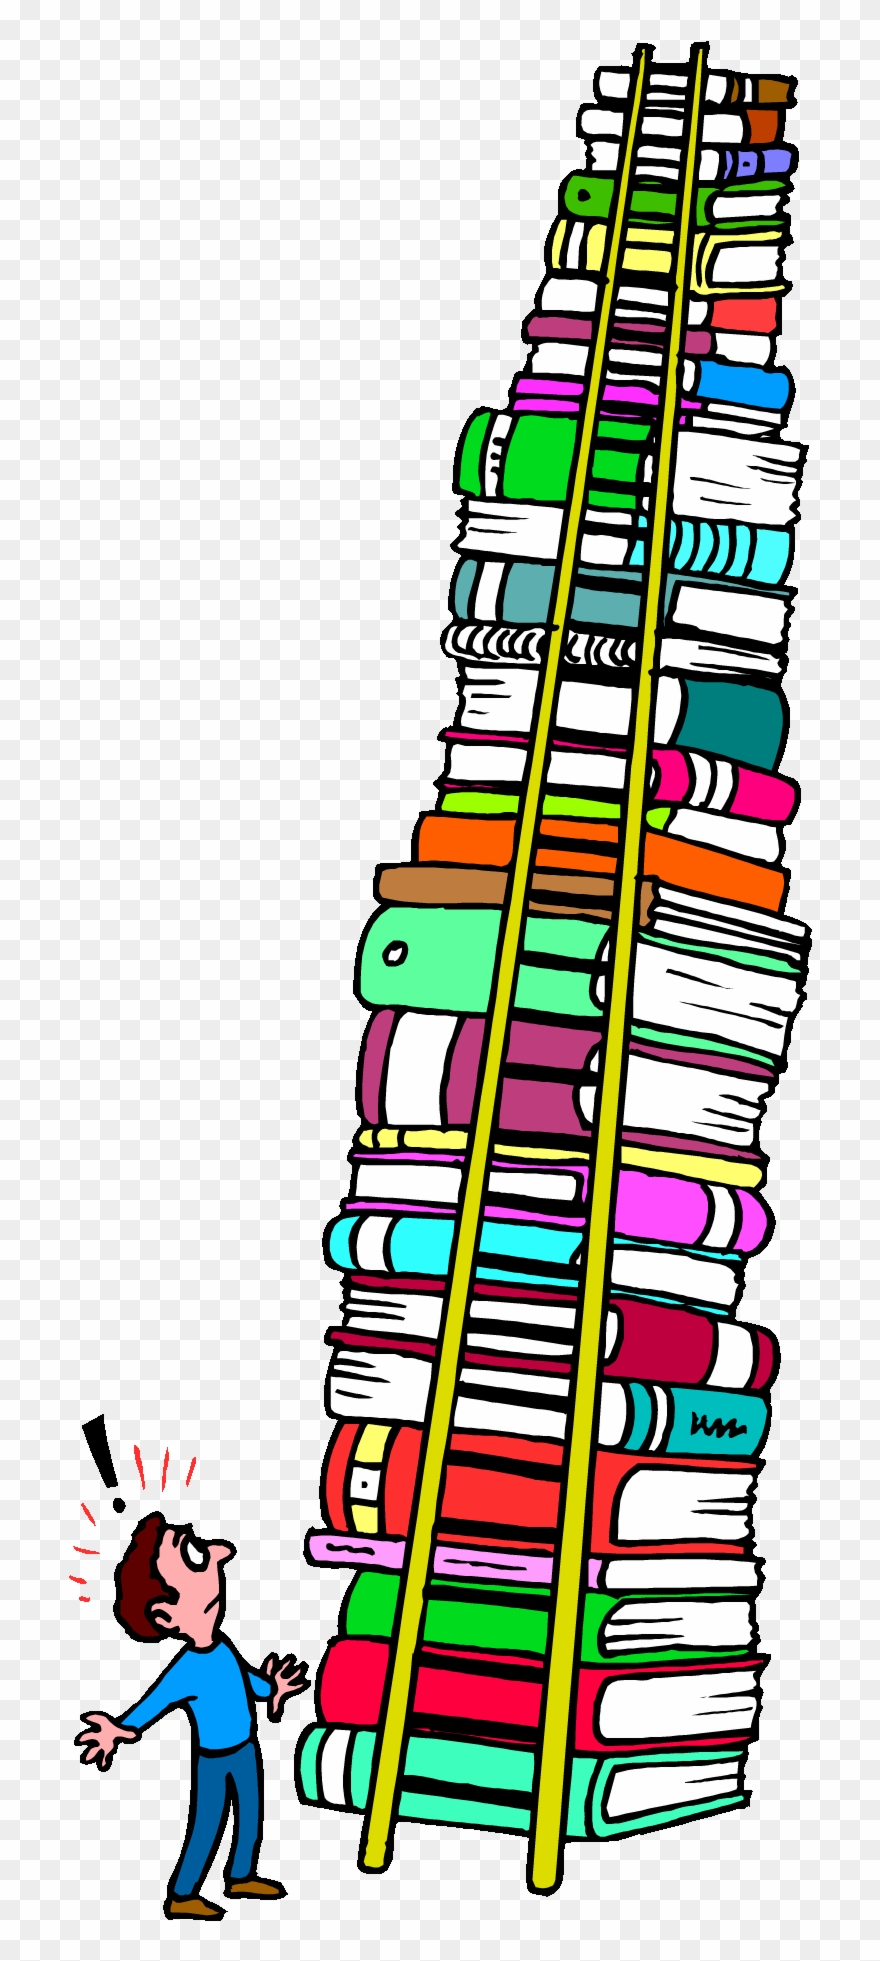 Tall stack books.